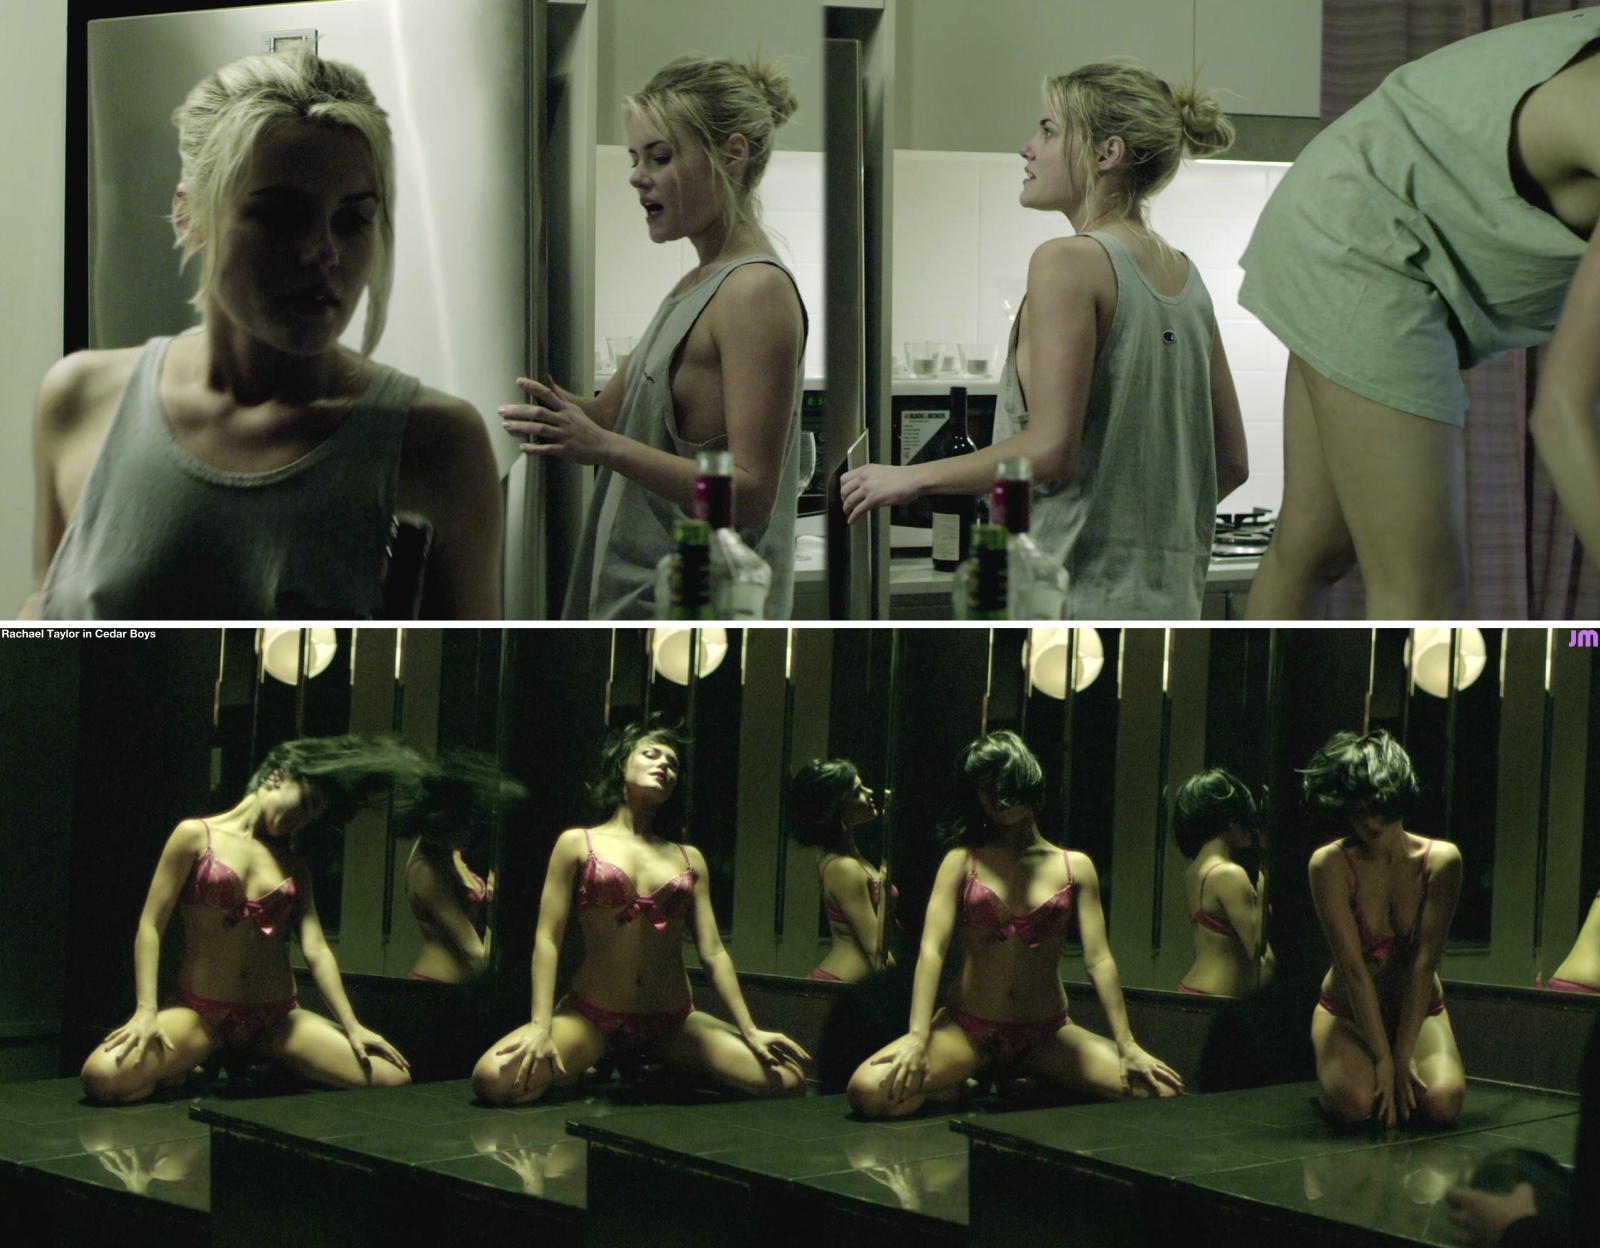 Rachel taylor naked - Rachael Taylor nude, topless pictures, playboy ...